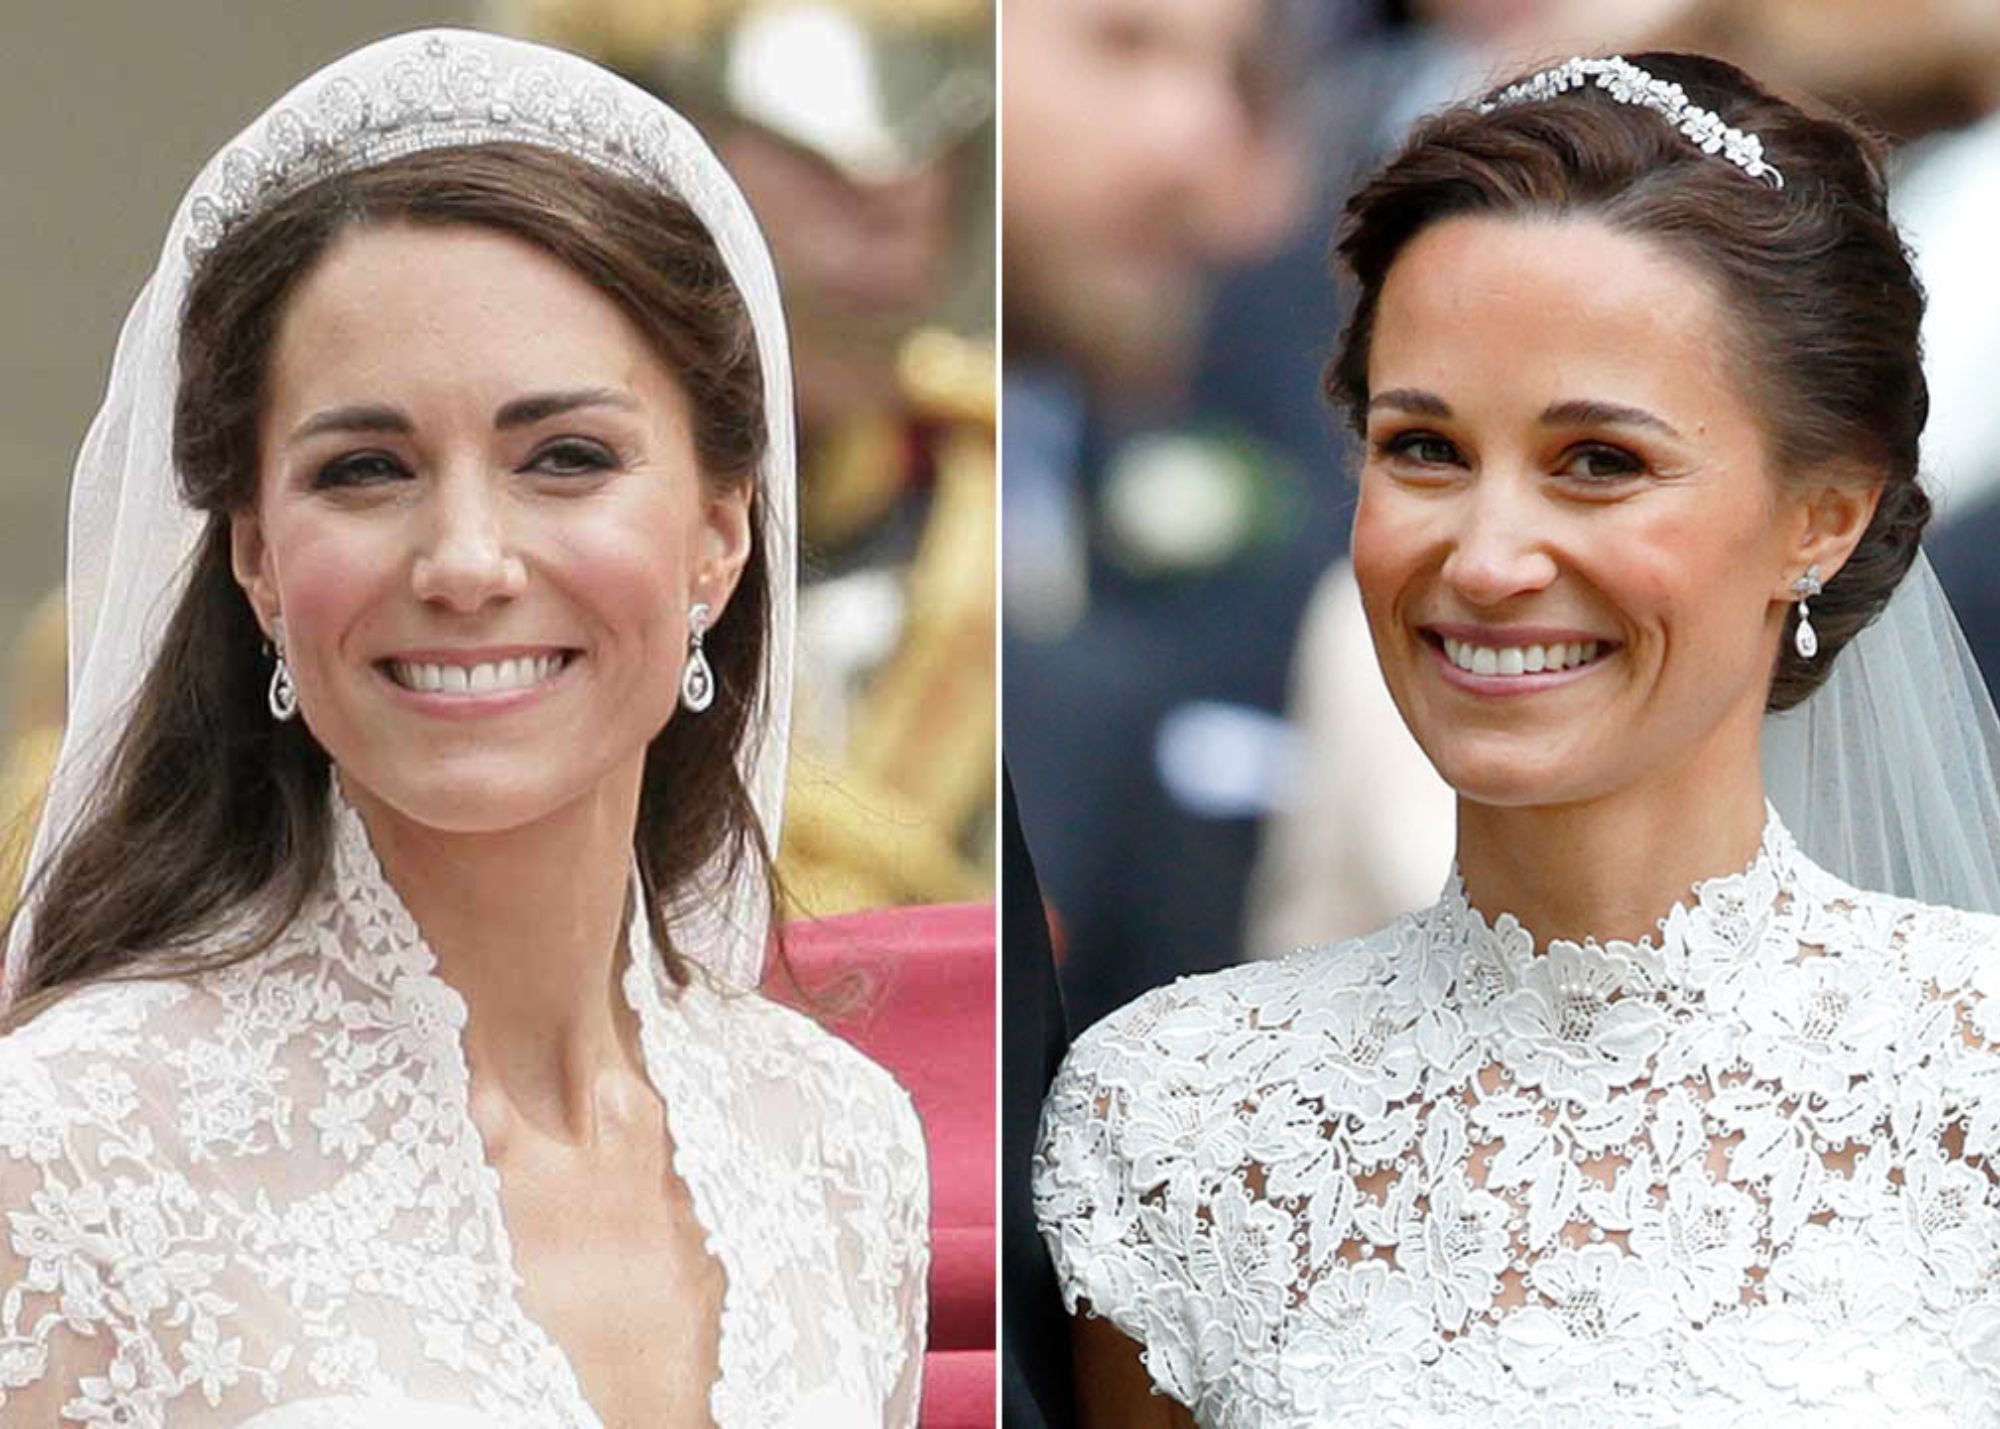 Kate Middleton with her hair down and on the right is an updo hairstyle